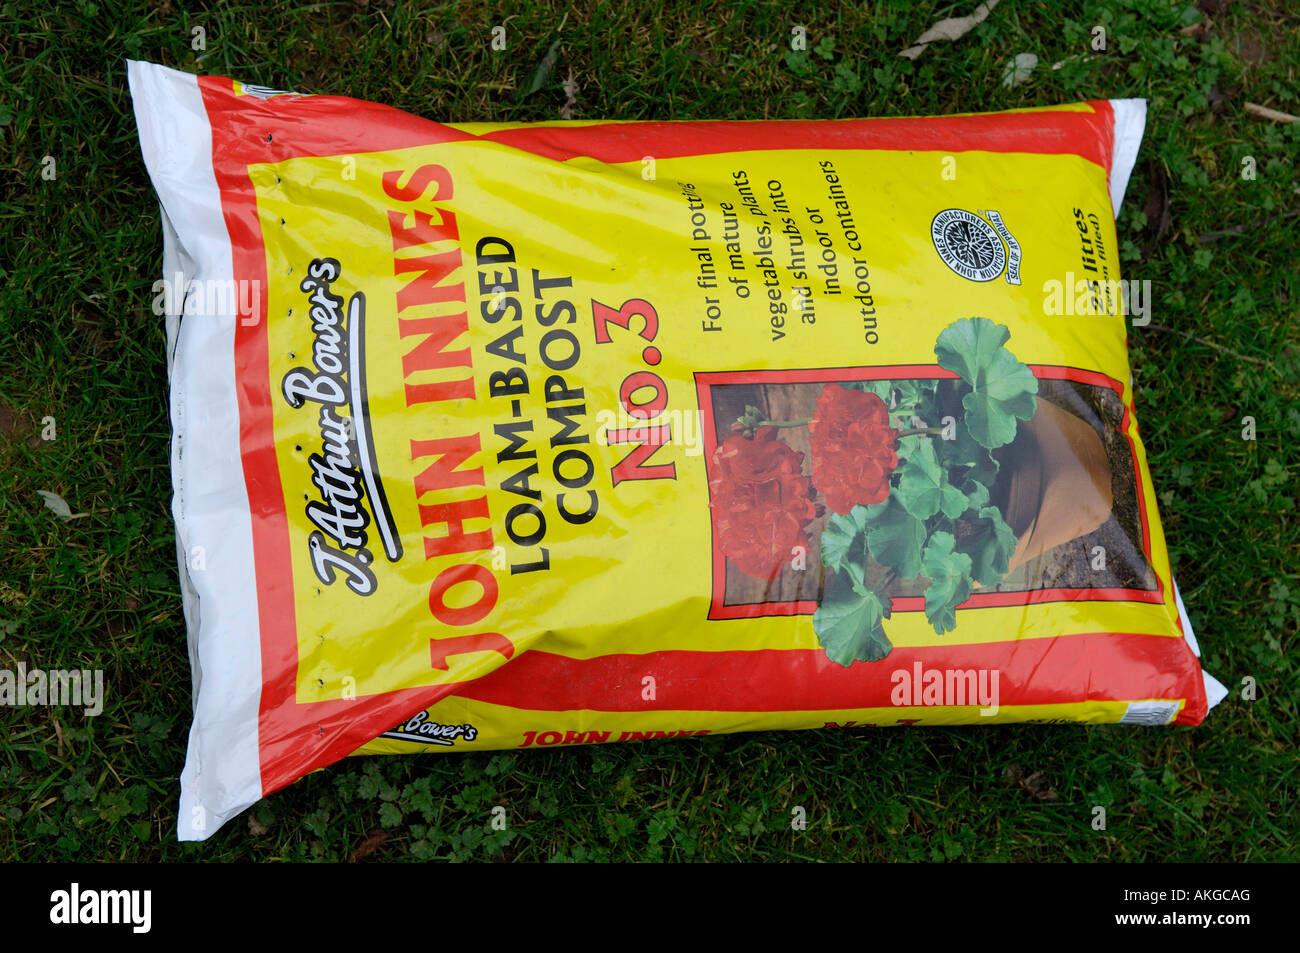 A bag of John Innes number 3 loam based compost for final plant potting Stock Photo